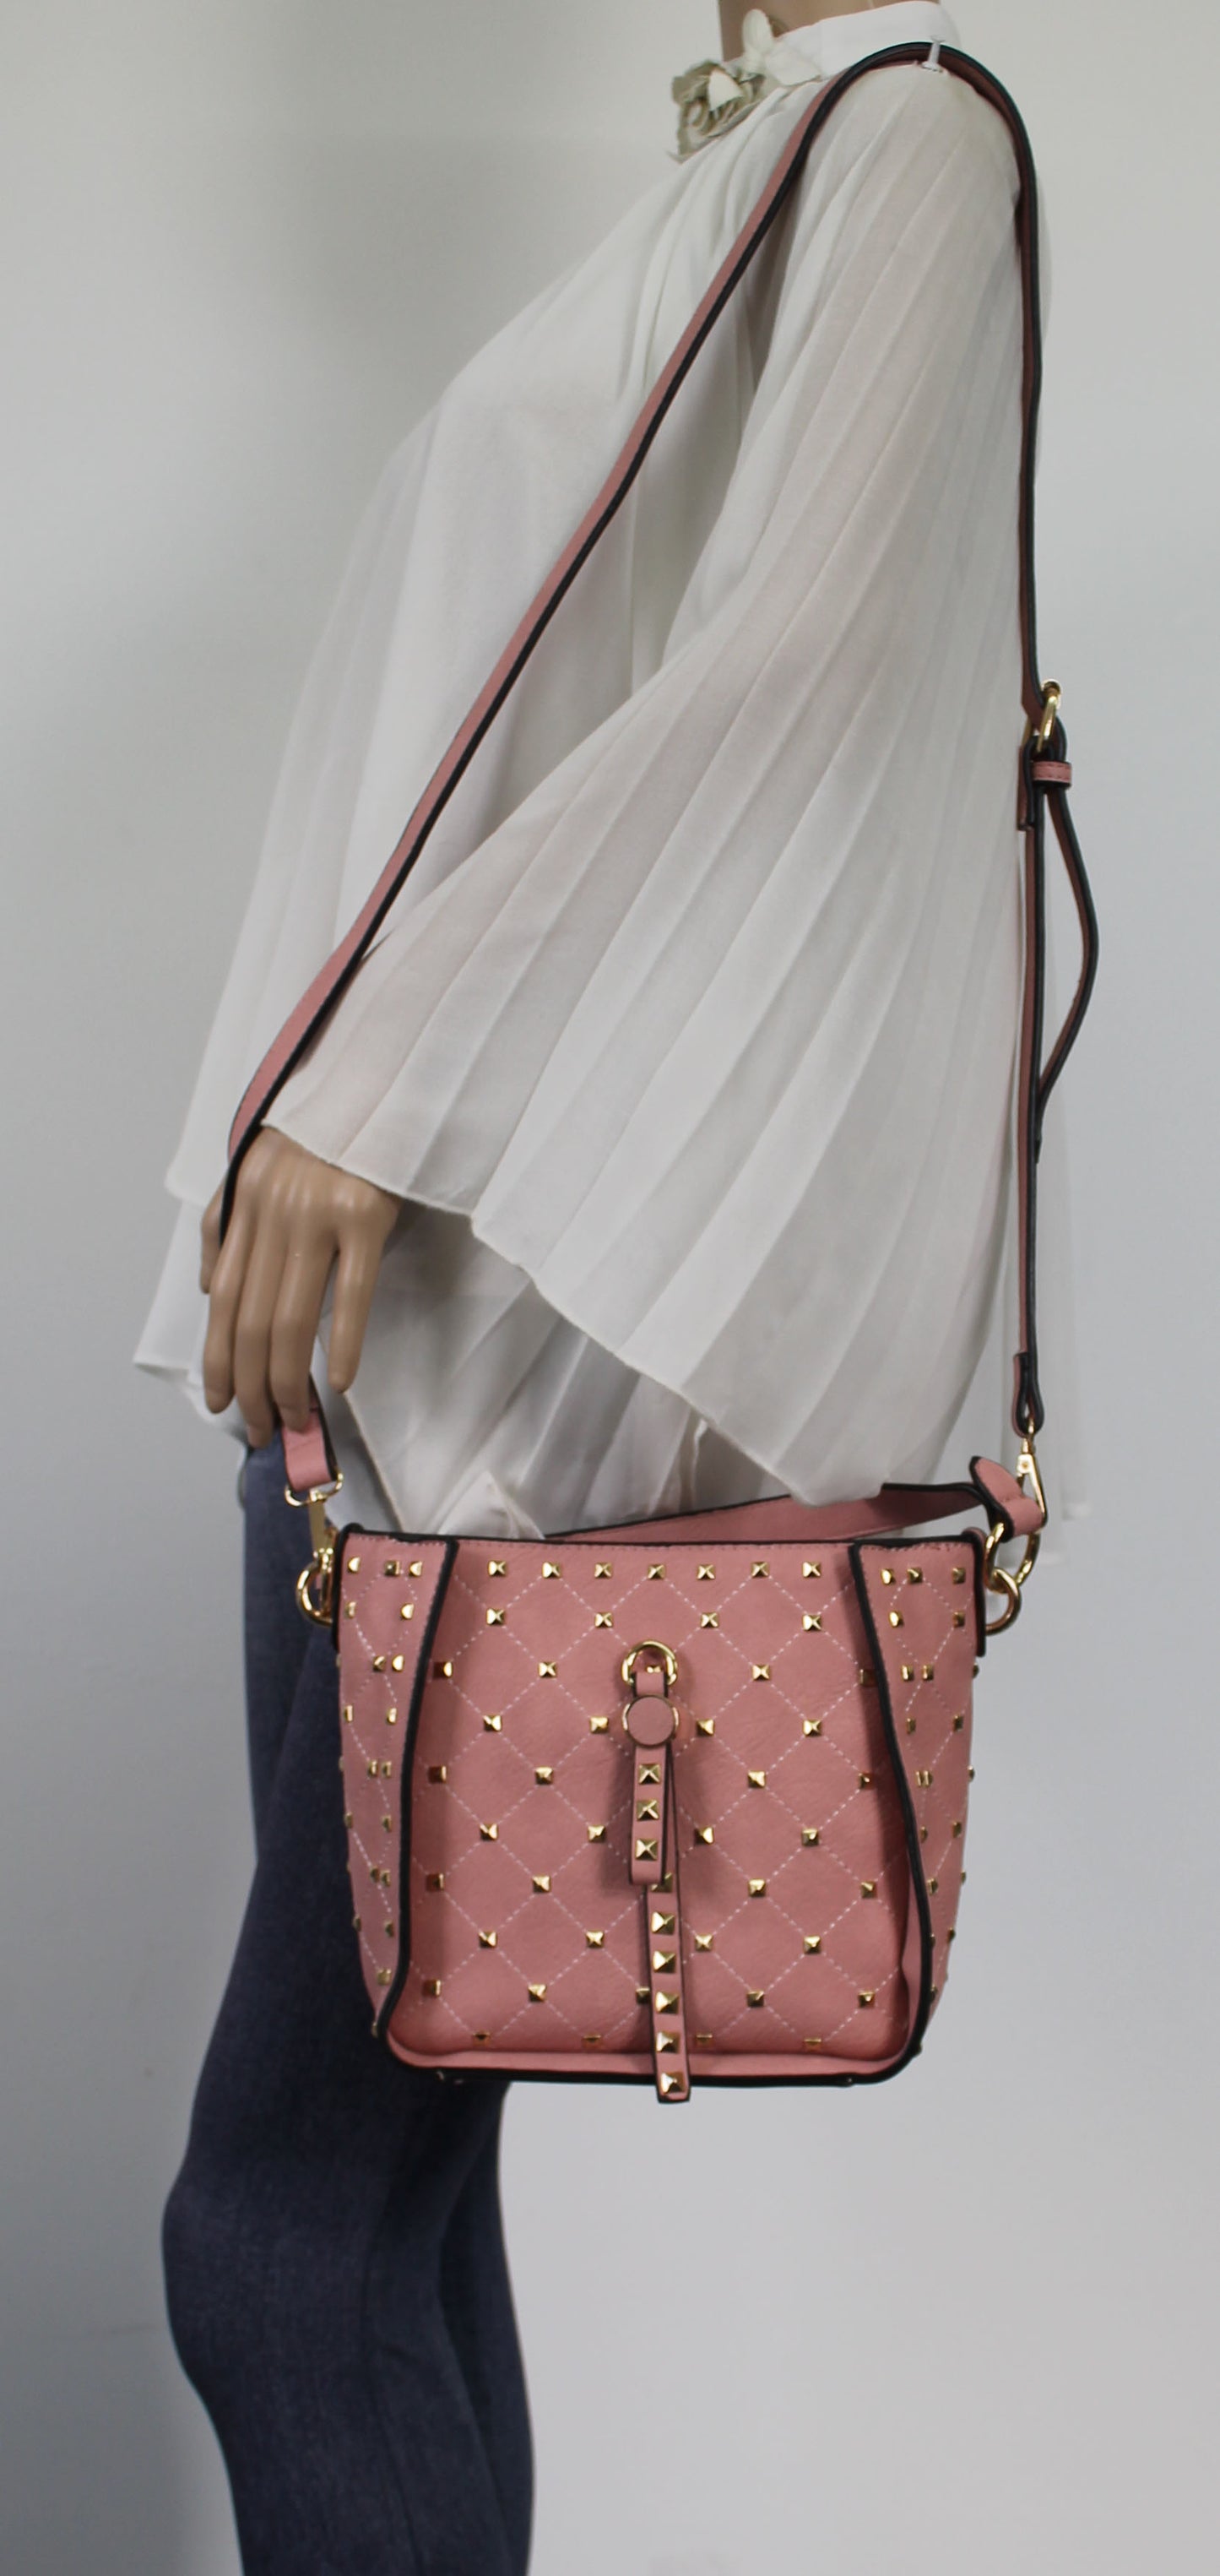 Buy your Faith Handbag Pink Today! Buy with confidence from Swankyswans